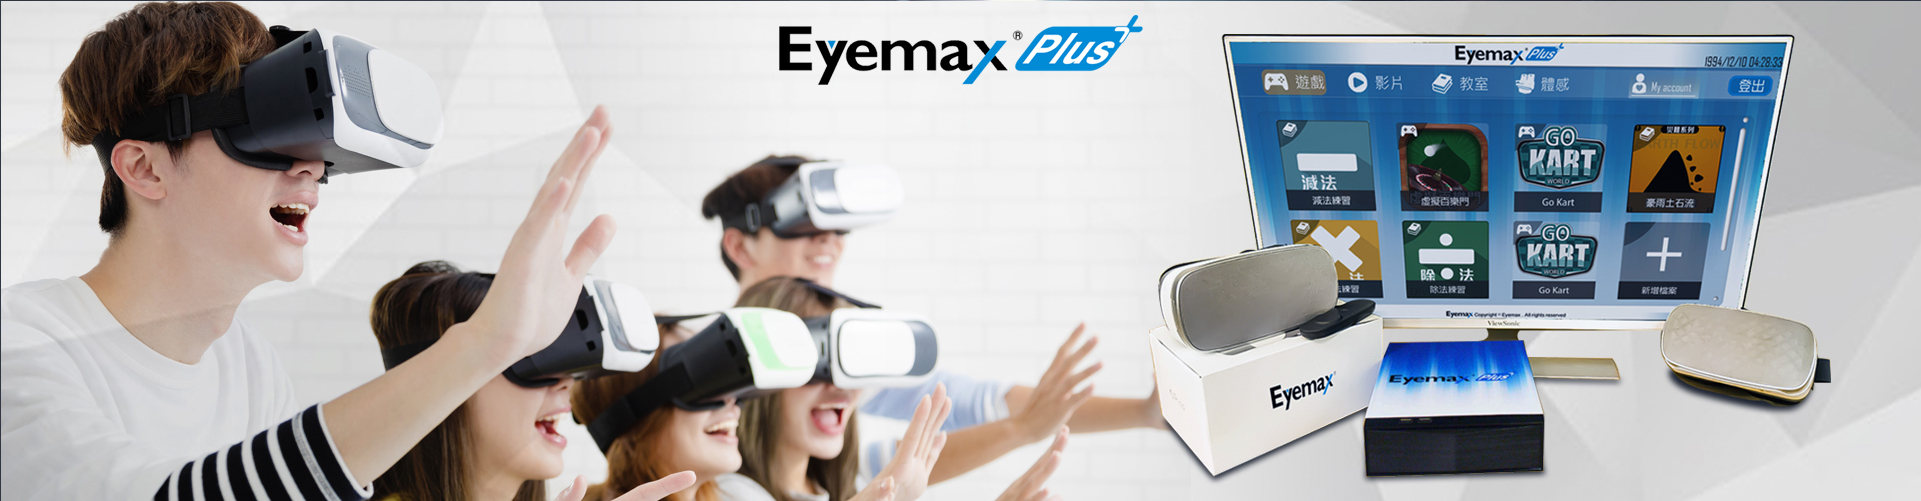 Eyemax announced the upcoming launch of the Eyemax Plus VR broadcast system.